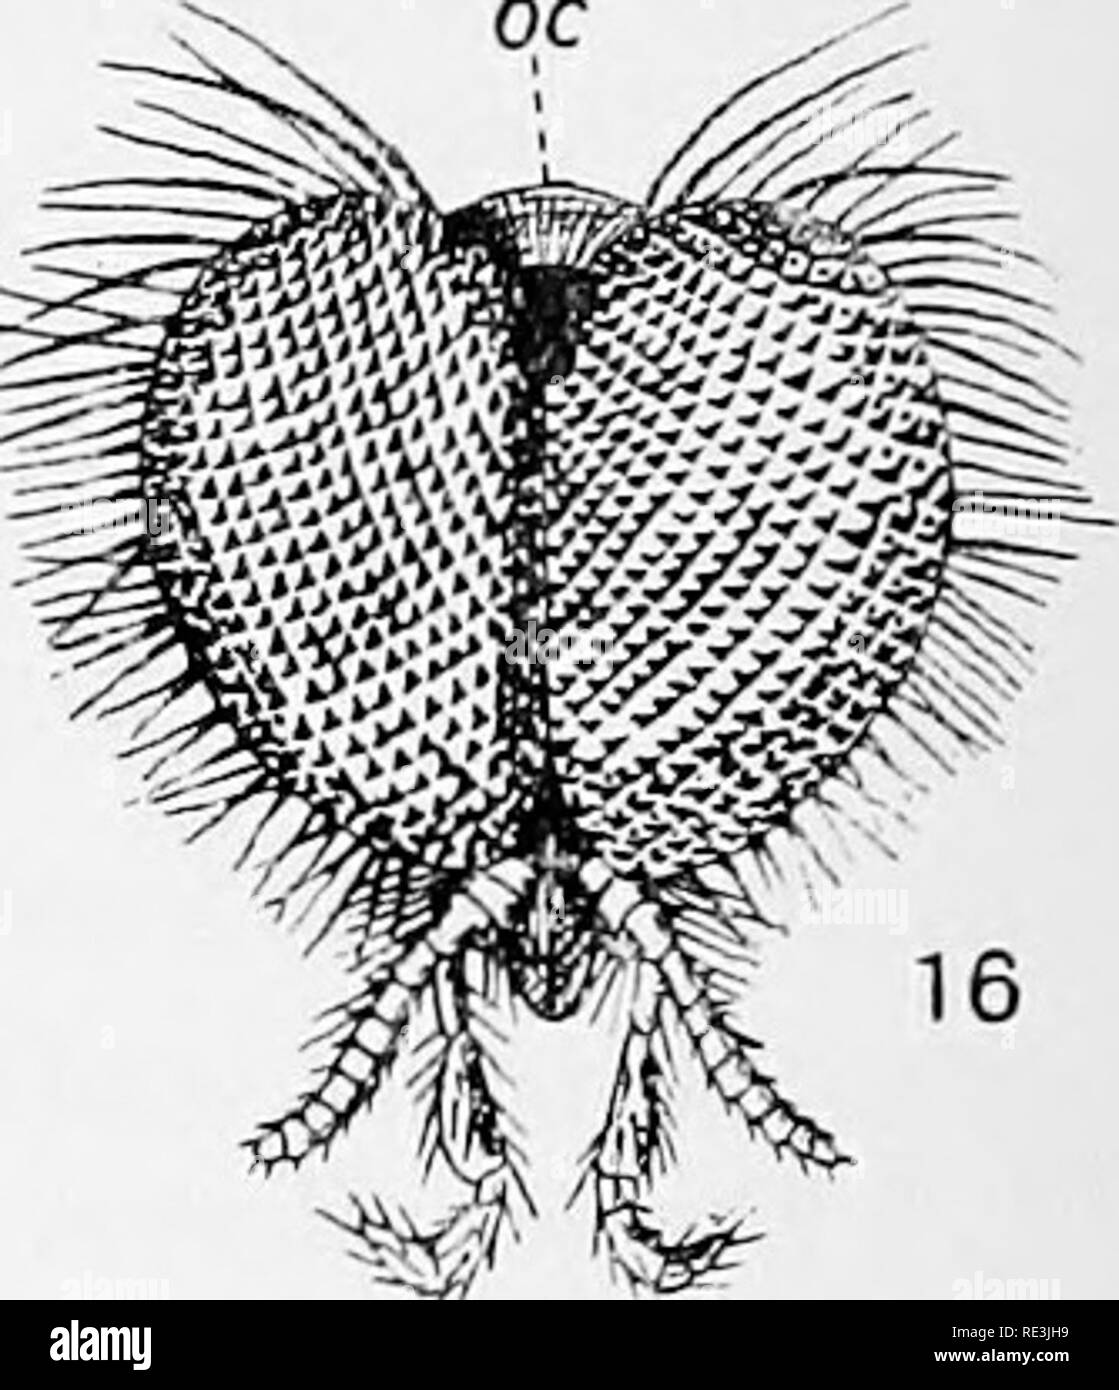 . Flies in relation to disease: bloodsucking flies. Flies; Flies as carriers of disease; Diptera. Fig. lo. Wing of Kellnggina, a blepliarocerid, shewing the network of fine vein-like creases ( x 12). Fig. II. Thorax of Tipiila, with V-shaped transverse suture on scutum ( xS). Fig. 12. Wing of Ryphiis (X12). The costal vein does not extend beyond the apex of the wing. Fig. 13. Wing of Cecidomyia (X12). The costal vein extends completely round the wing. Fig. I.J. Antenna of Oyphnephila { X 80), Fig. 15. Right hind-leg of Mycetophilus, shewing the tibial spurs (X8). Fig. 16. Head of Bibio (X12);  Stock Photo